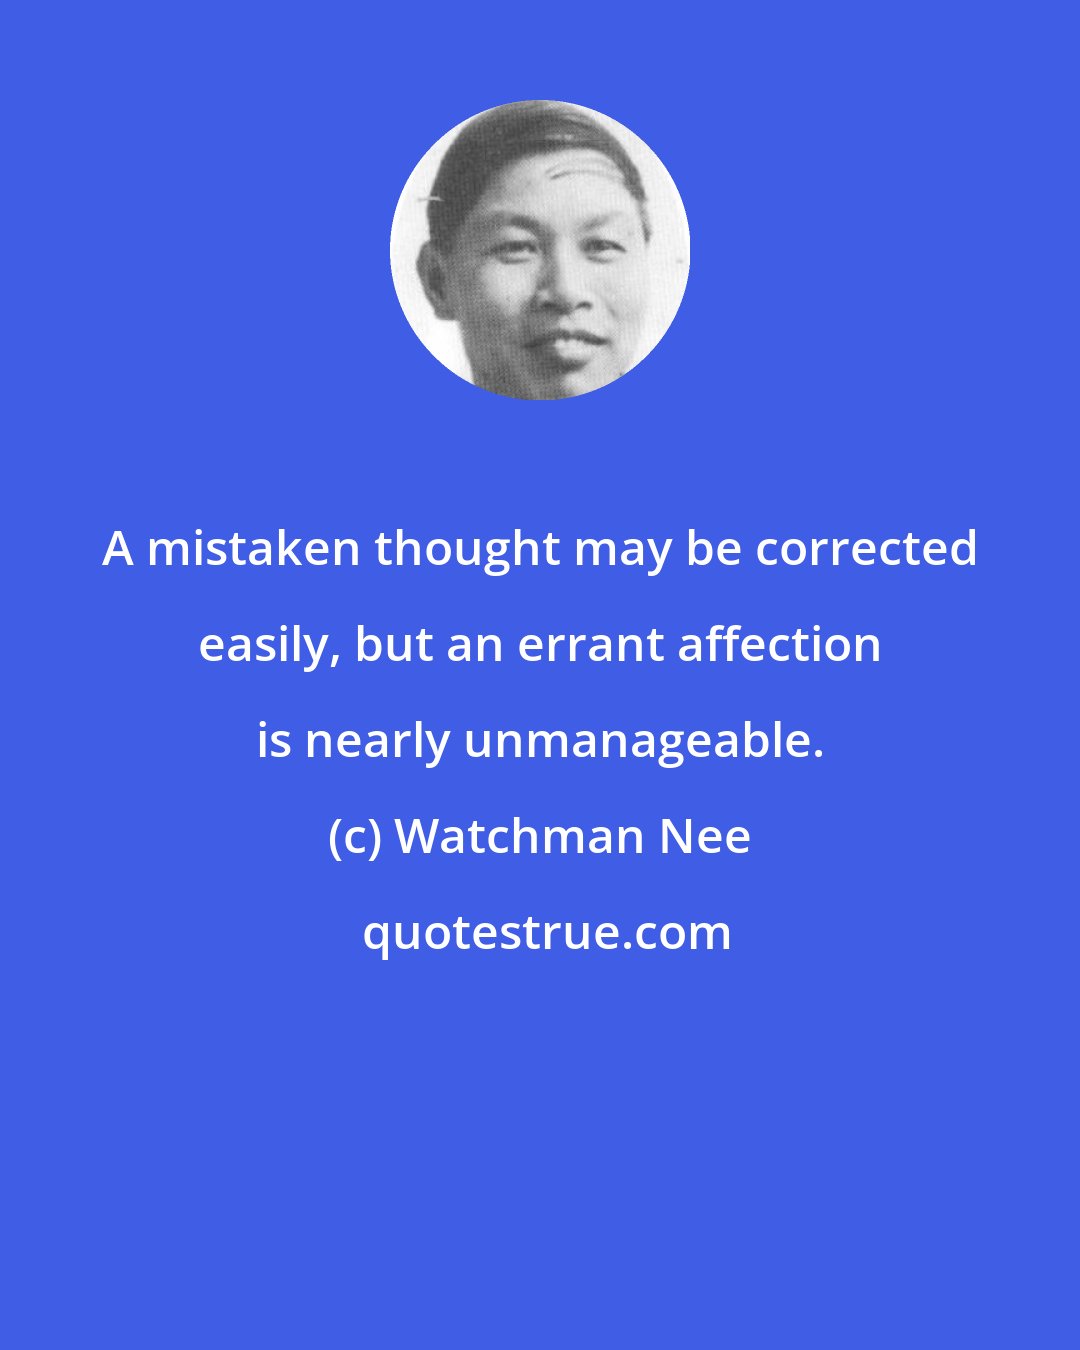 Watchman Nee: A mistaken thought may be corrected easily, but an errant affection is nearly unmanageable.